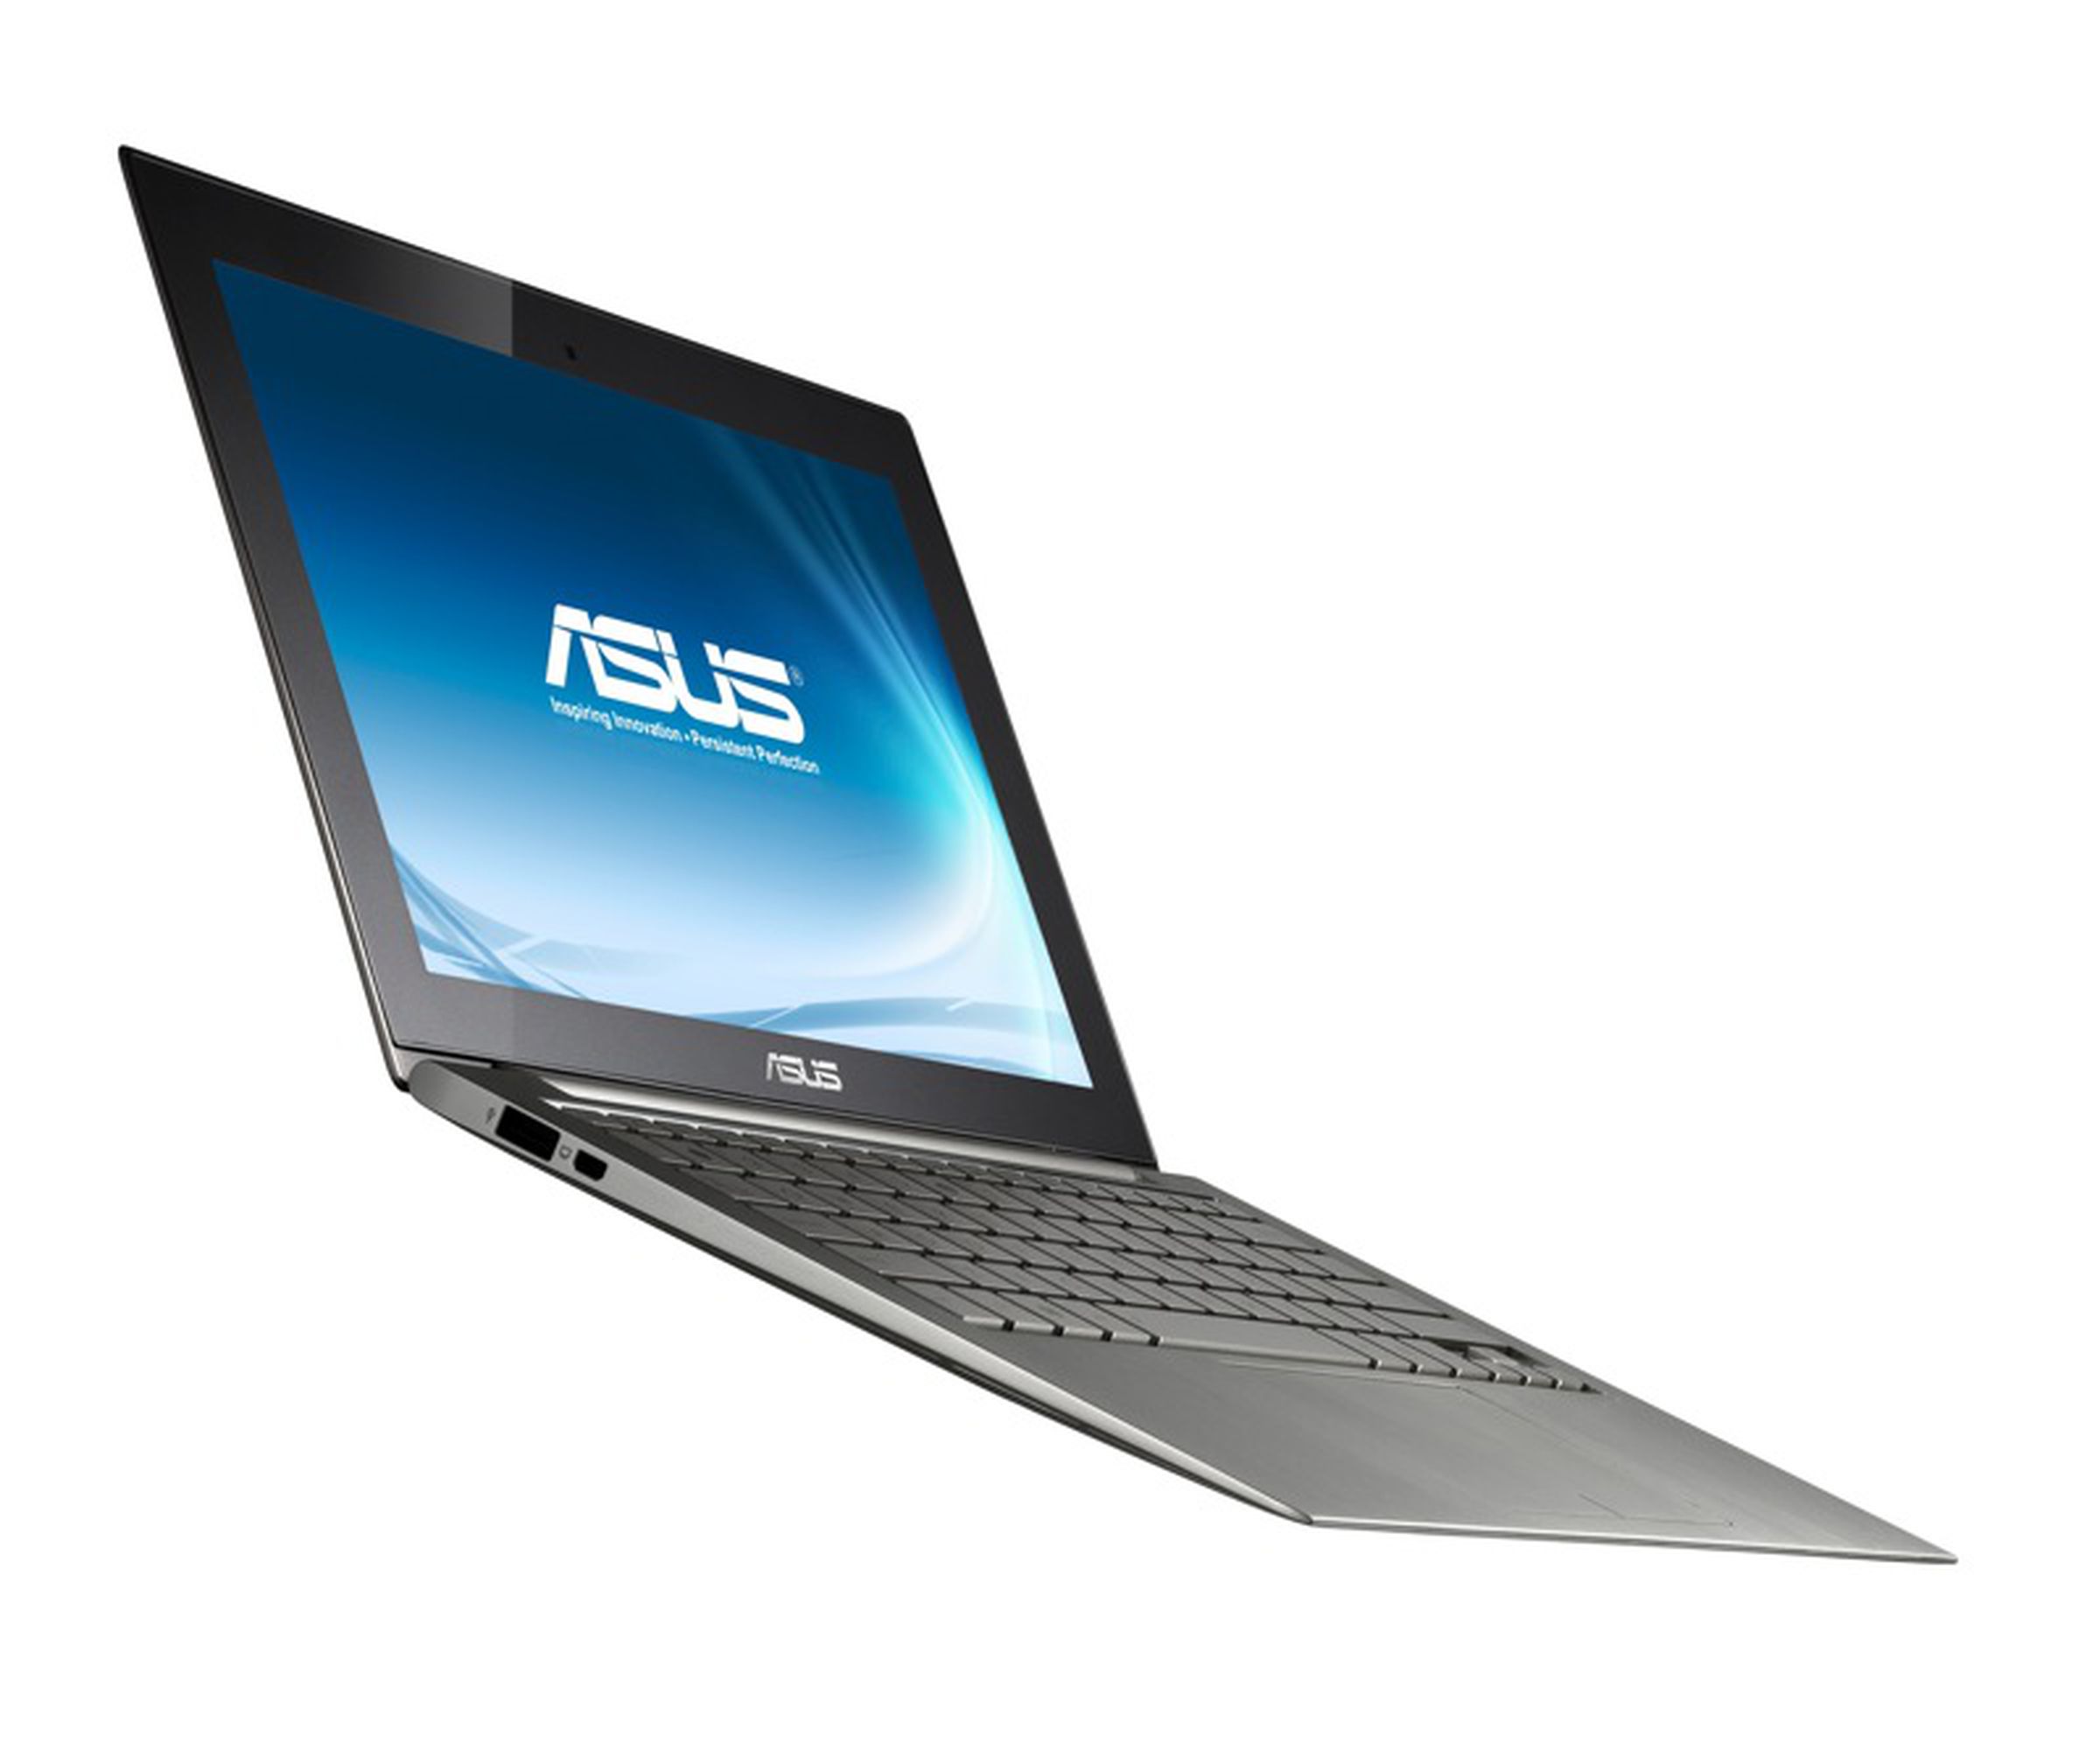 Asus Eee PC X101 pictures